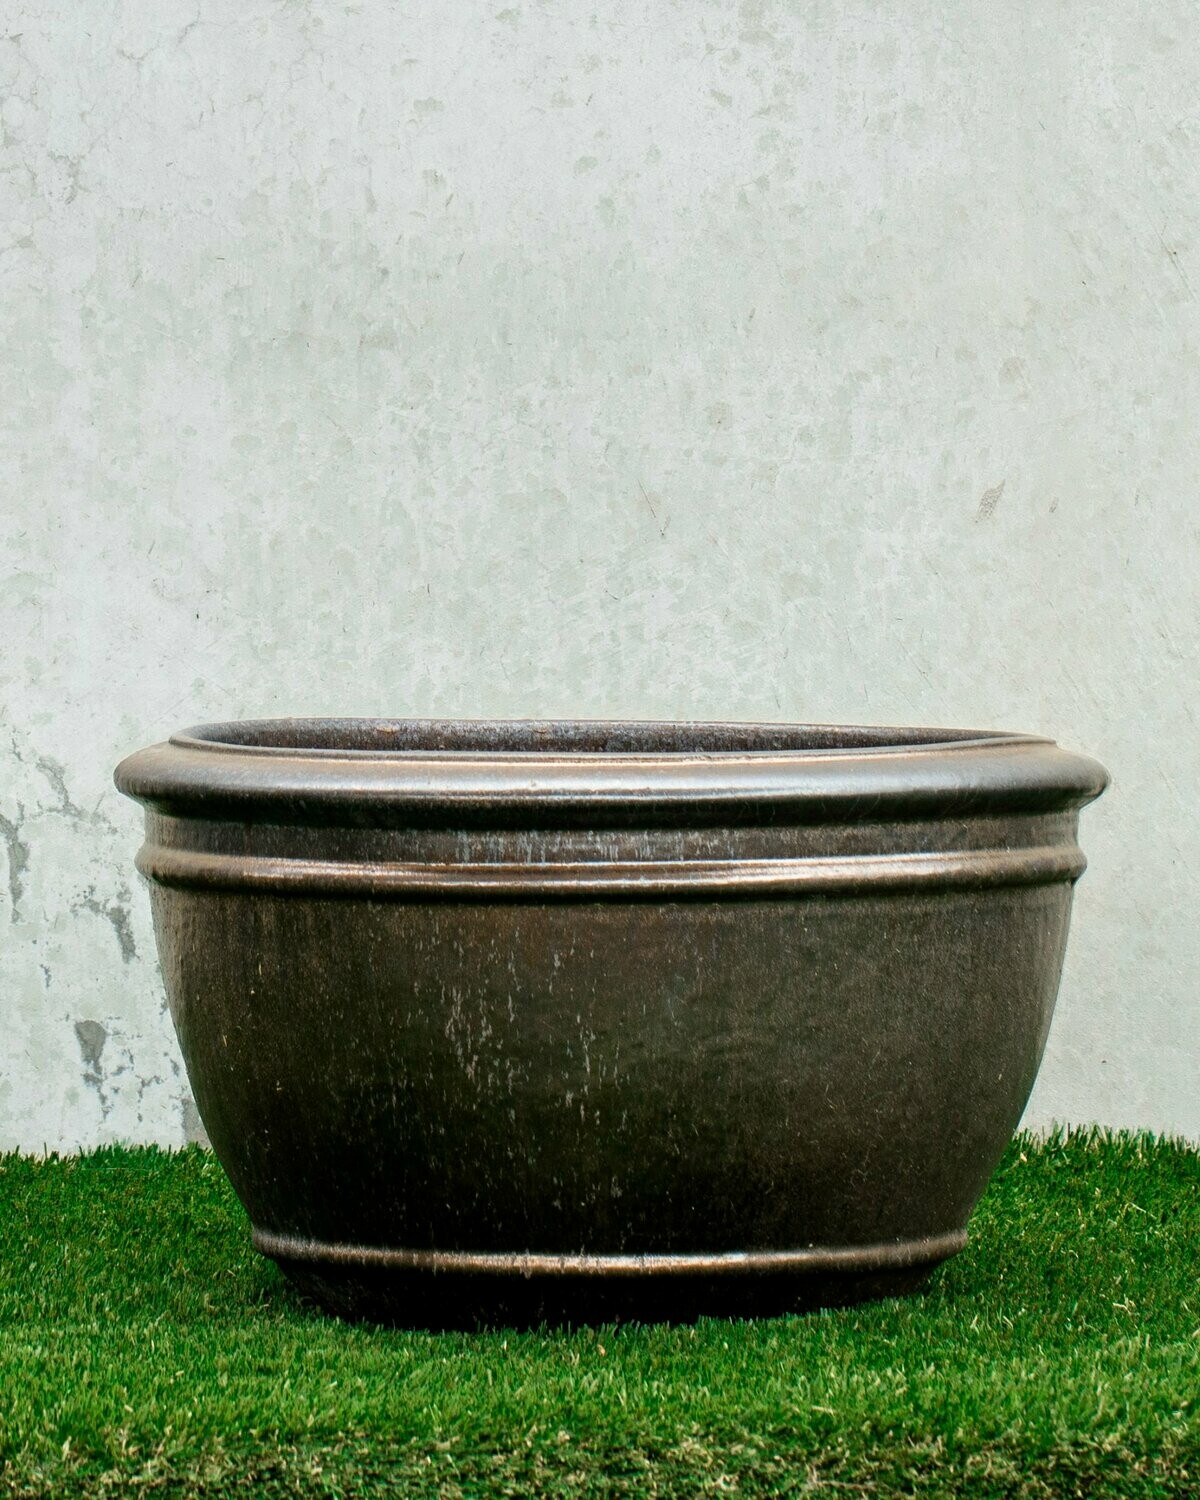 LARGE POT WITH RING
(76cm X 40cm)